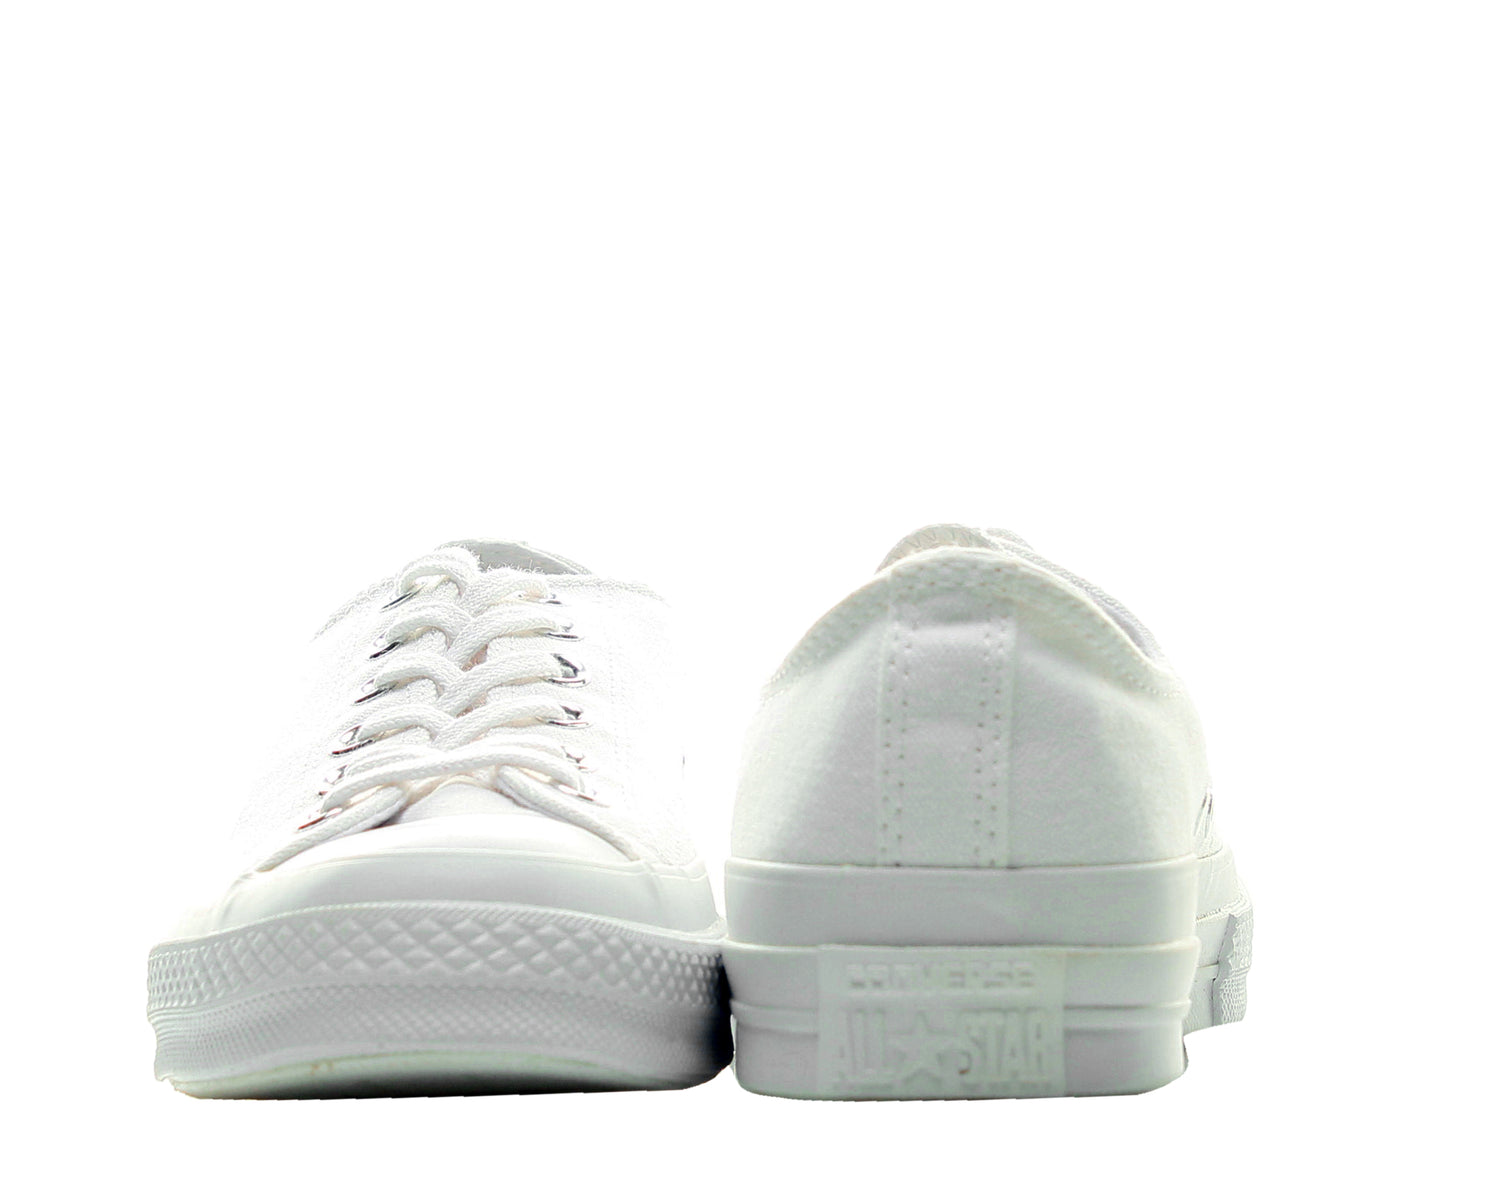 Converse Chuck Taylor All Star OX '70 Low Top Sneakers